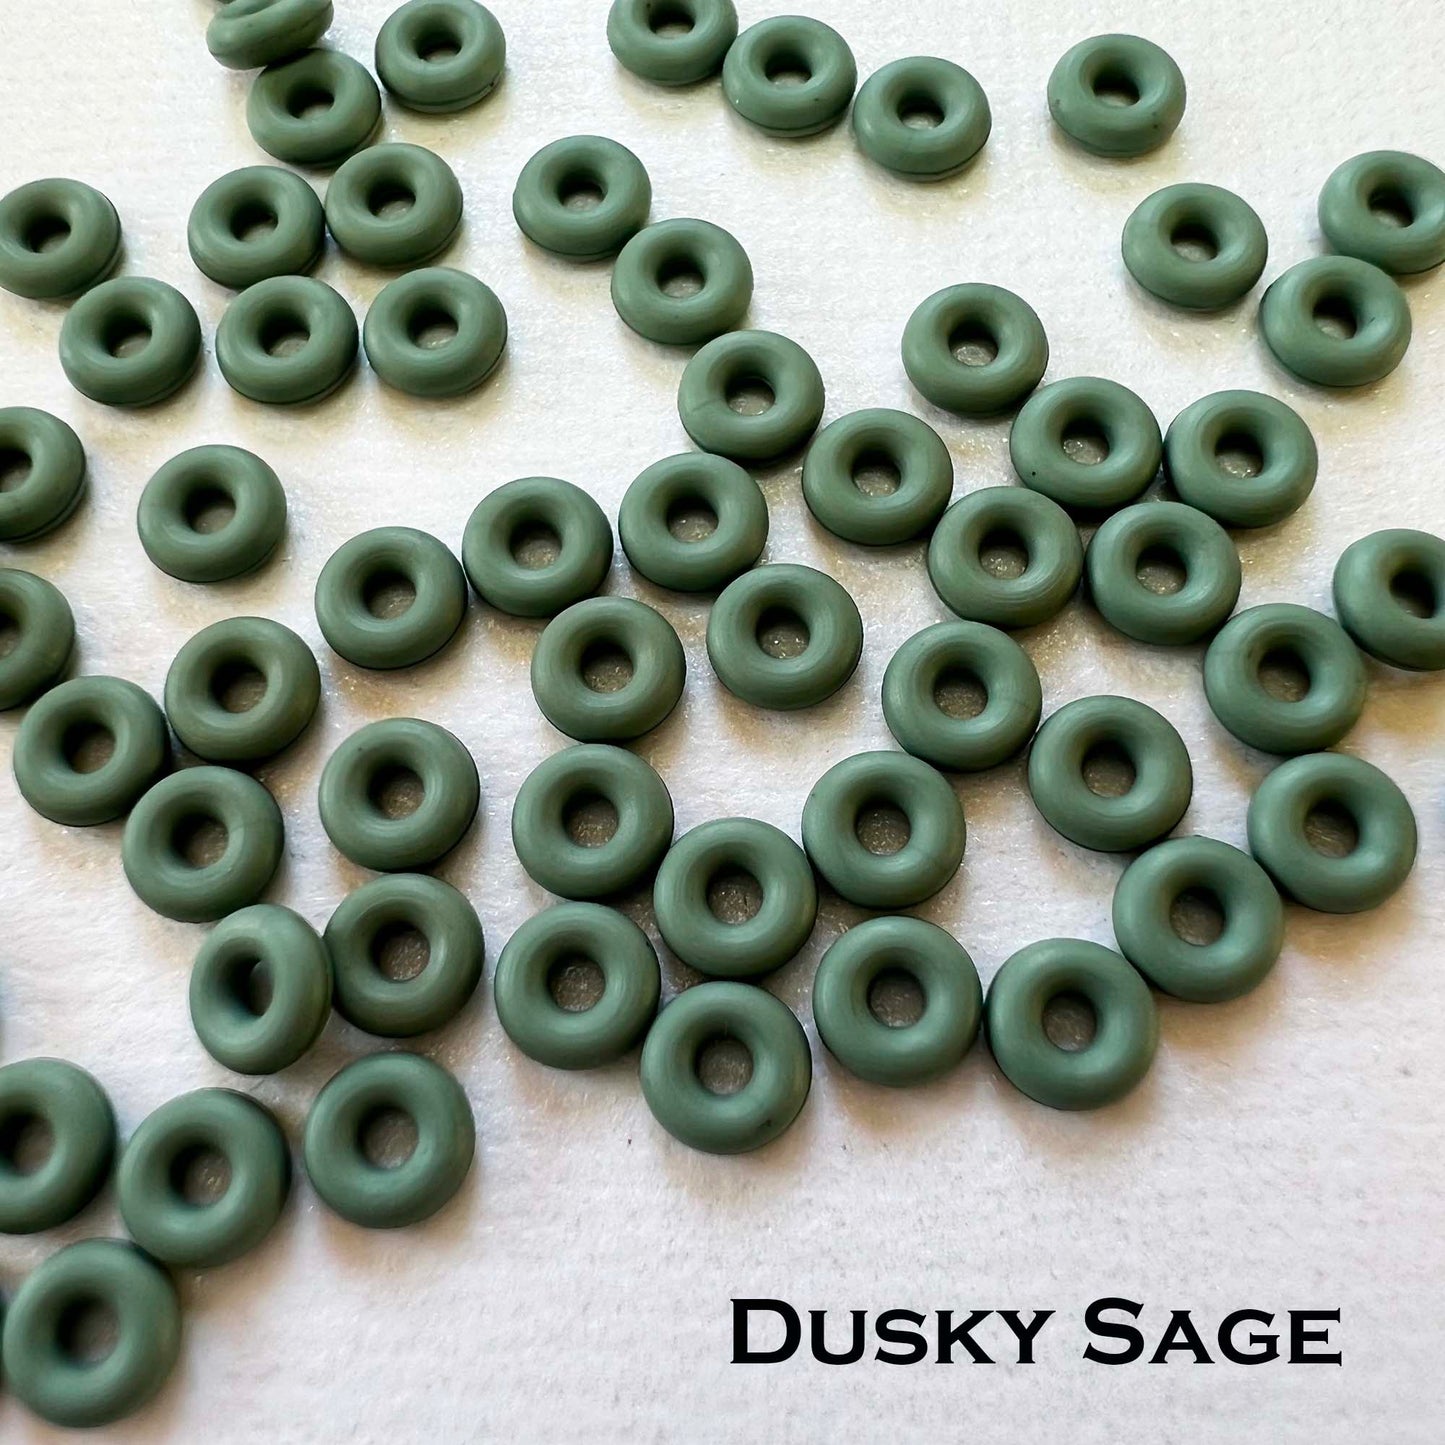 4.5mm Rubber O-Rings (ID: 1.5mm) - choose color/quantity